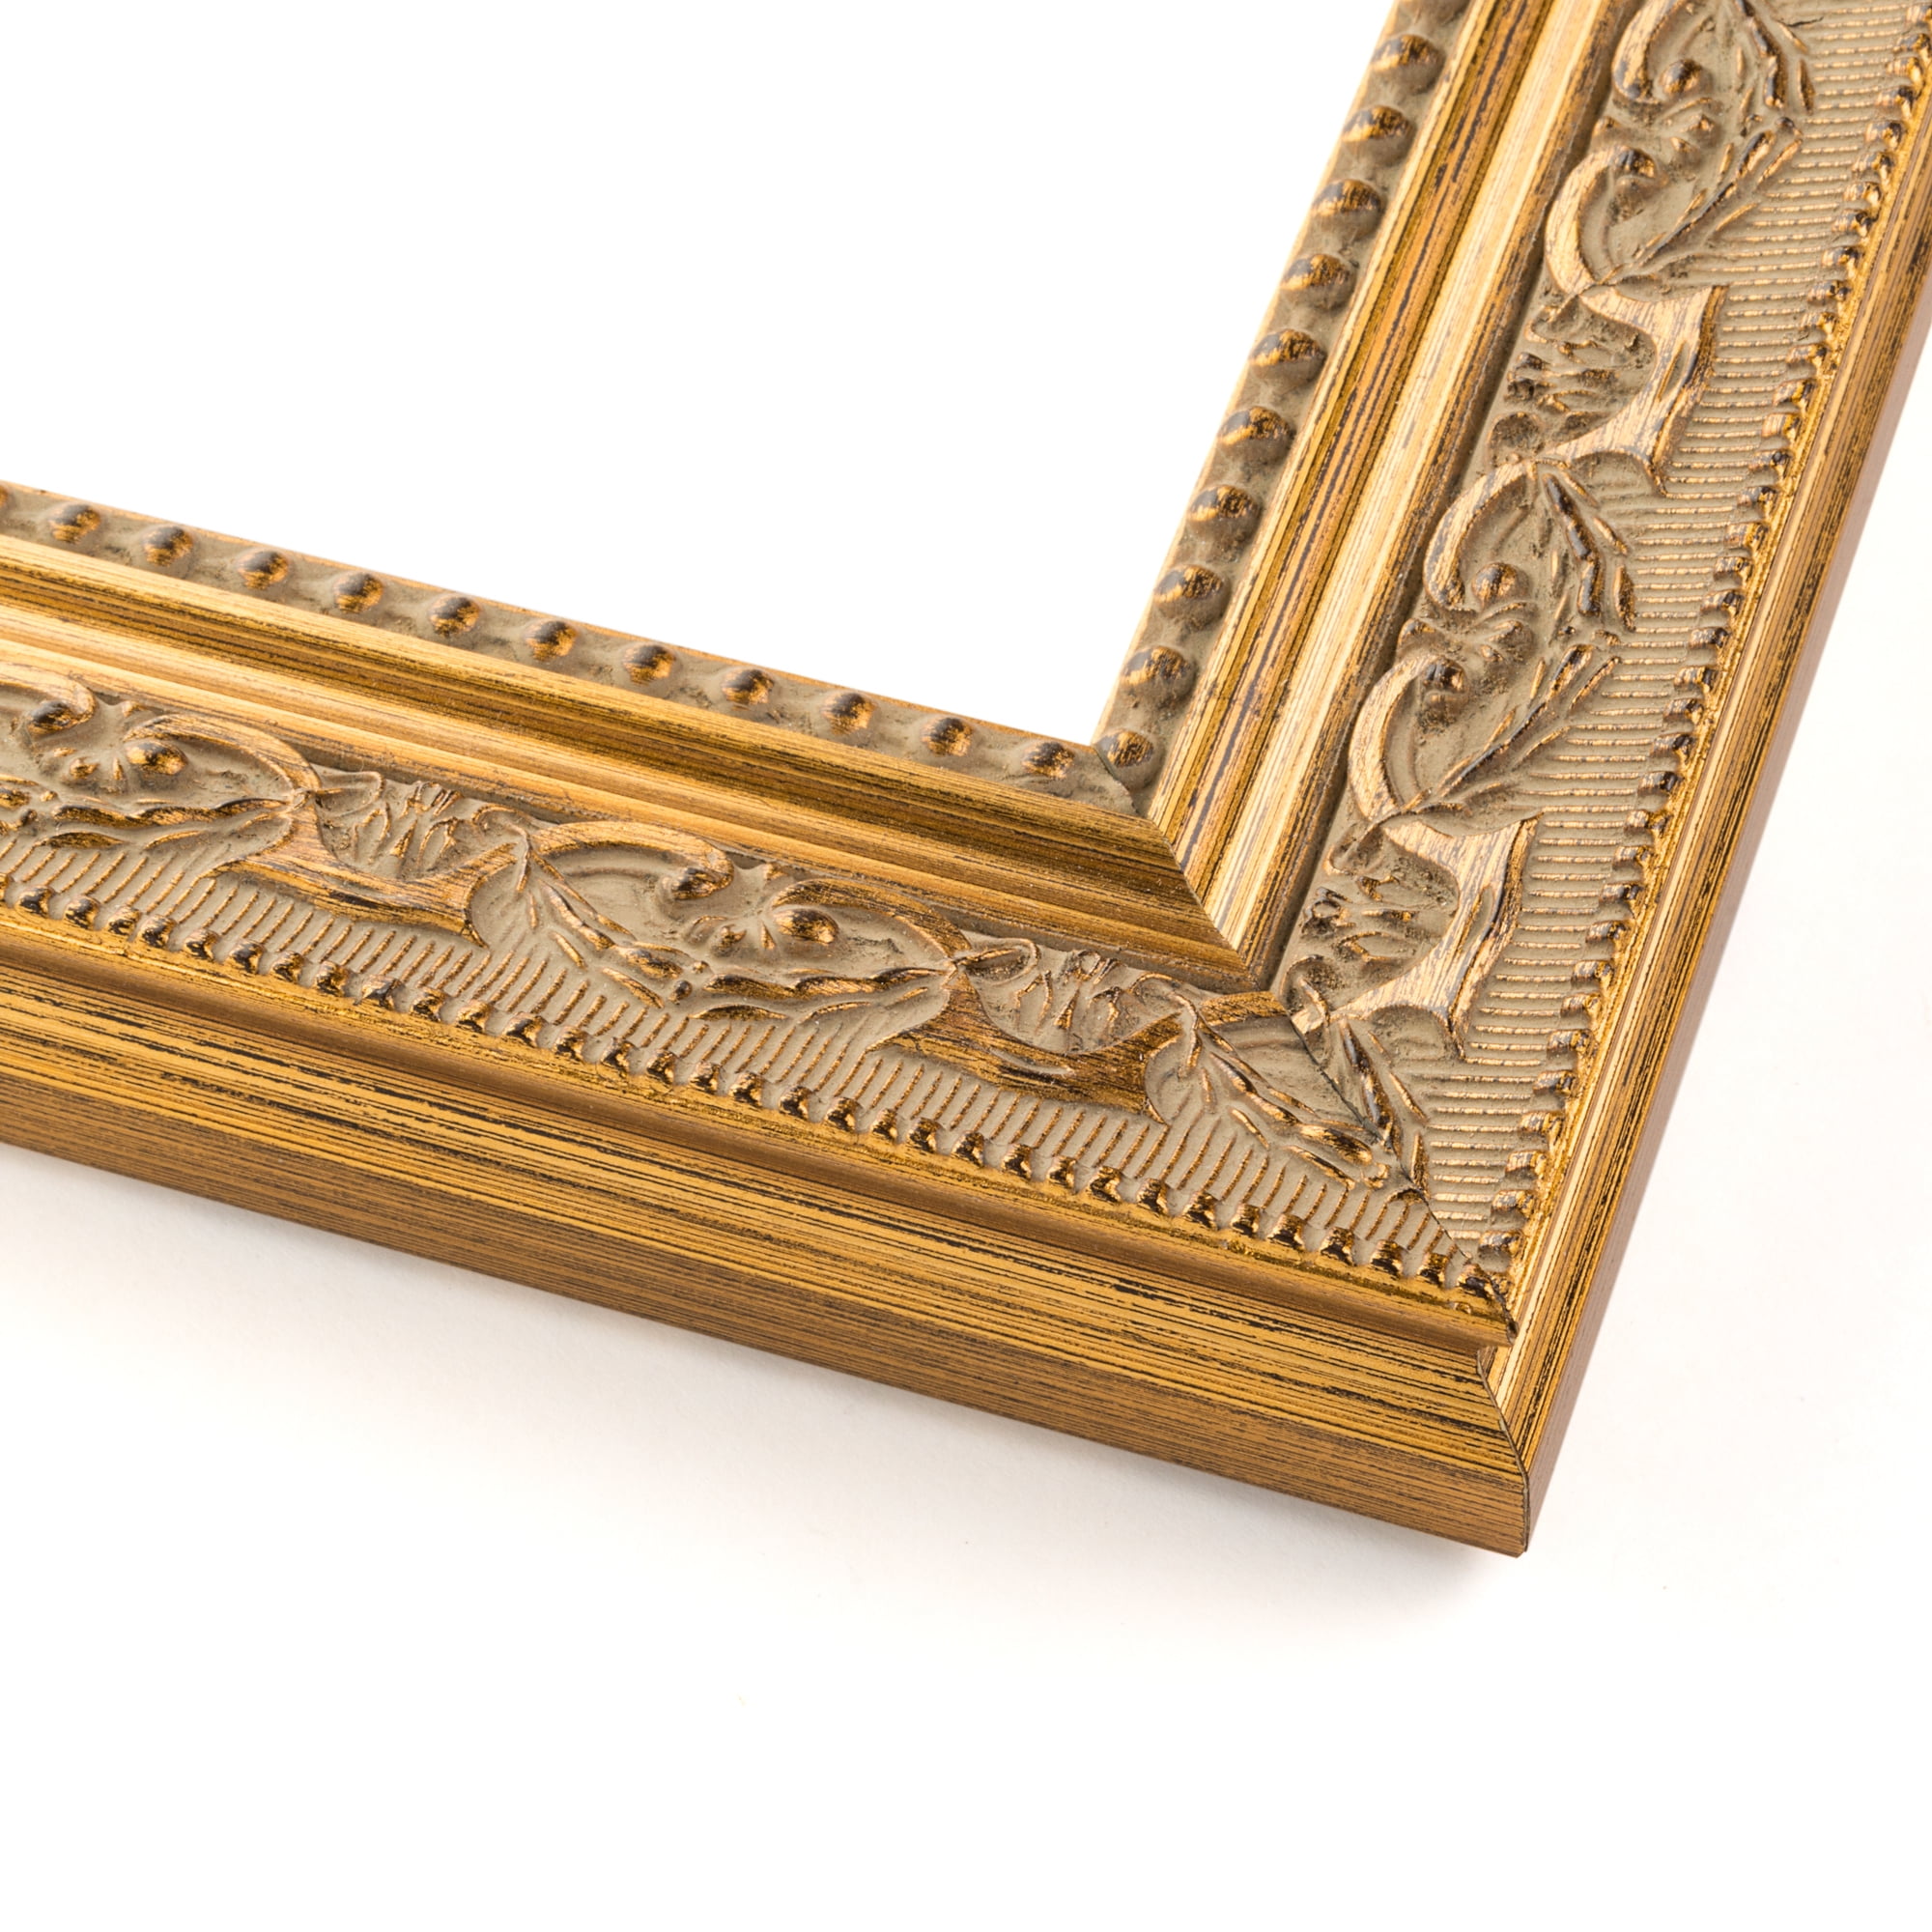 38x11 Frame Gold Solid Wood Picture Frame Width 3 Inches - Interior Frame Depth 0.625 Inches|Blue